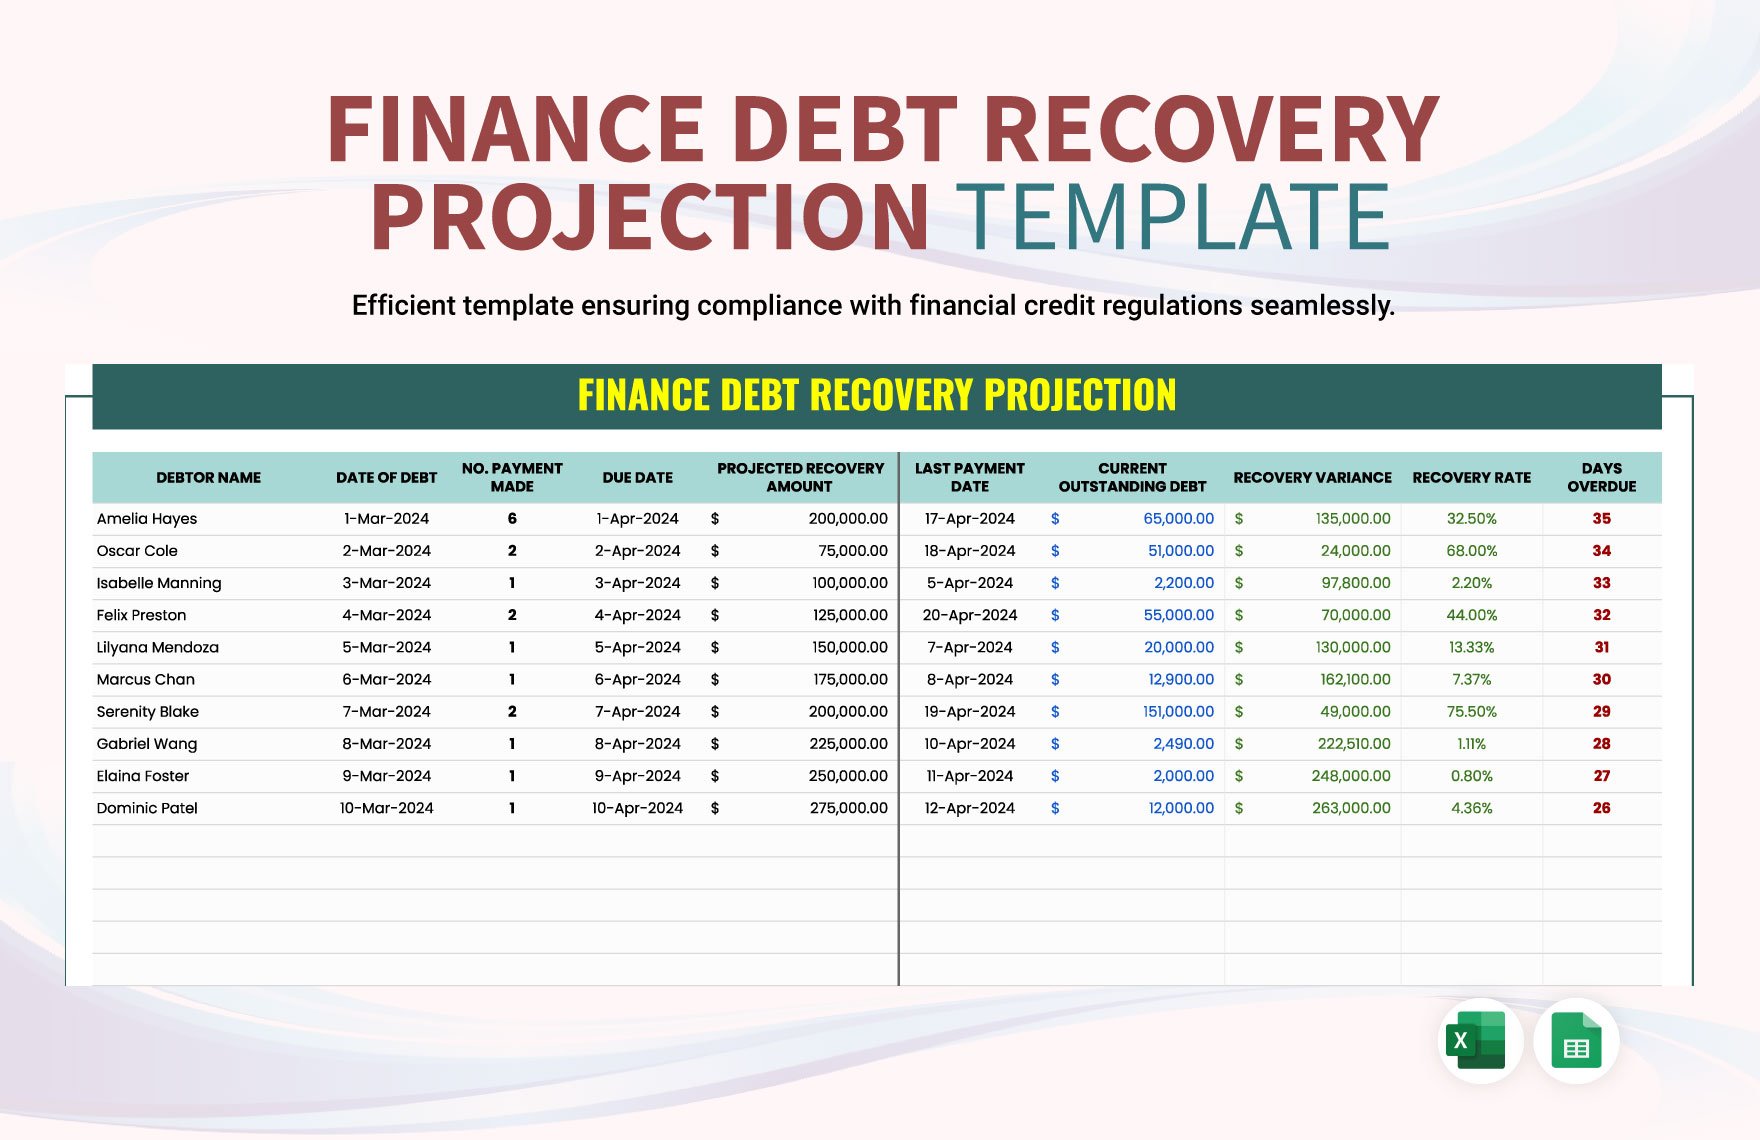 Finance Debt Recovery Projection Template